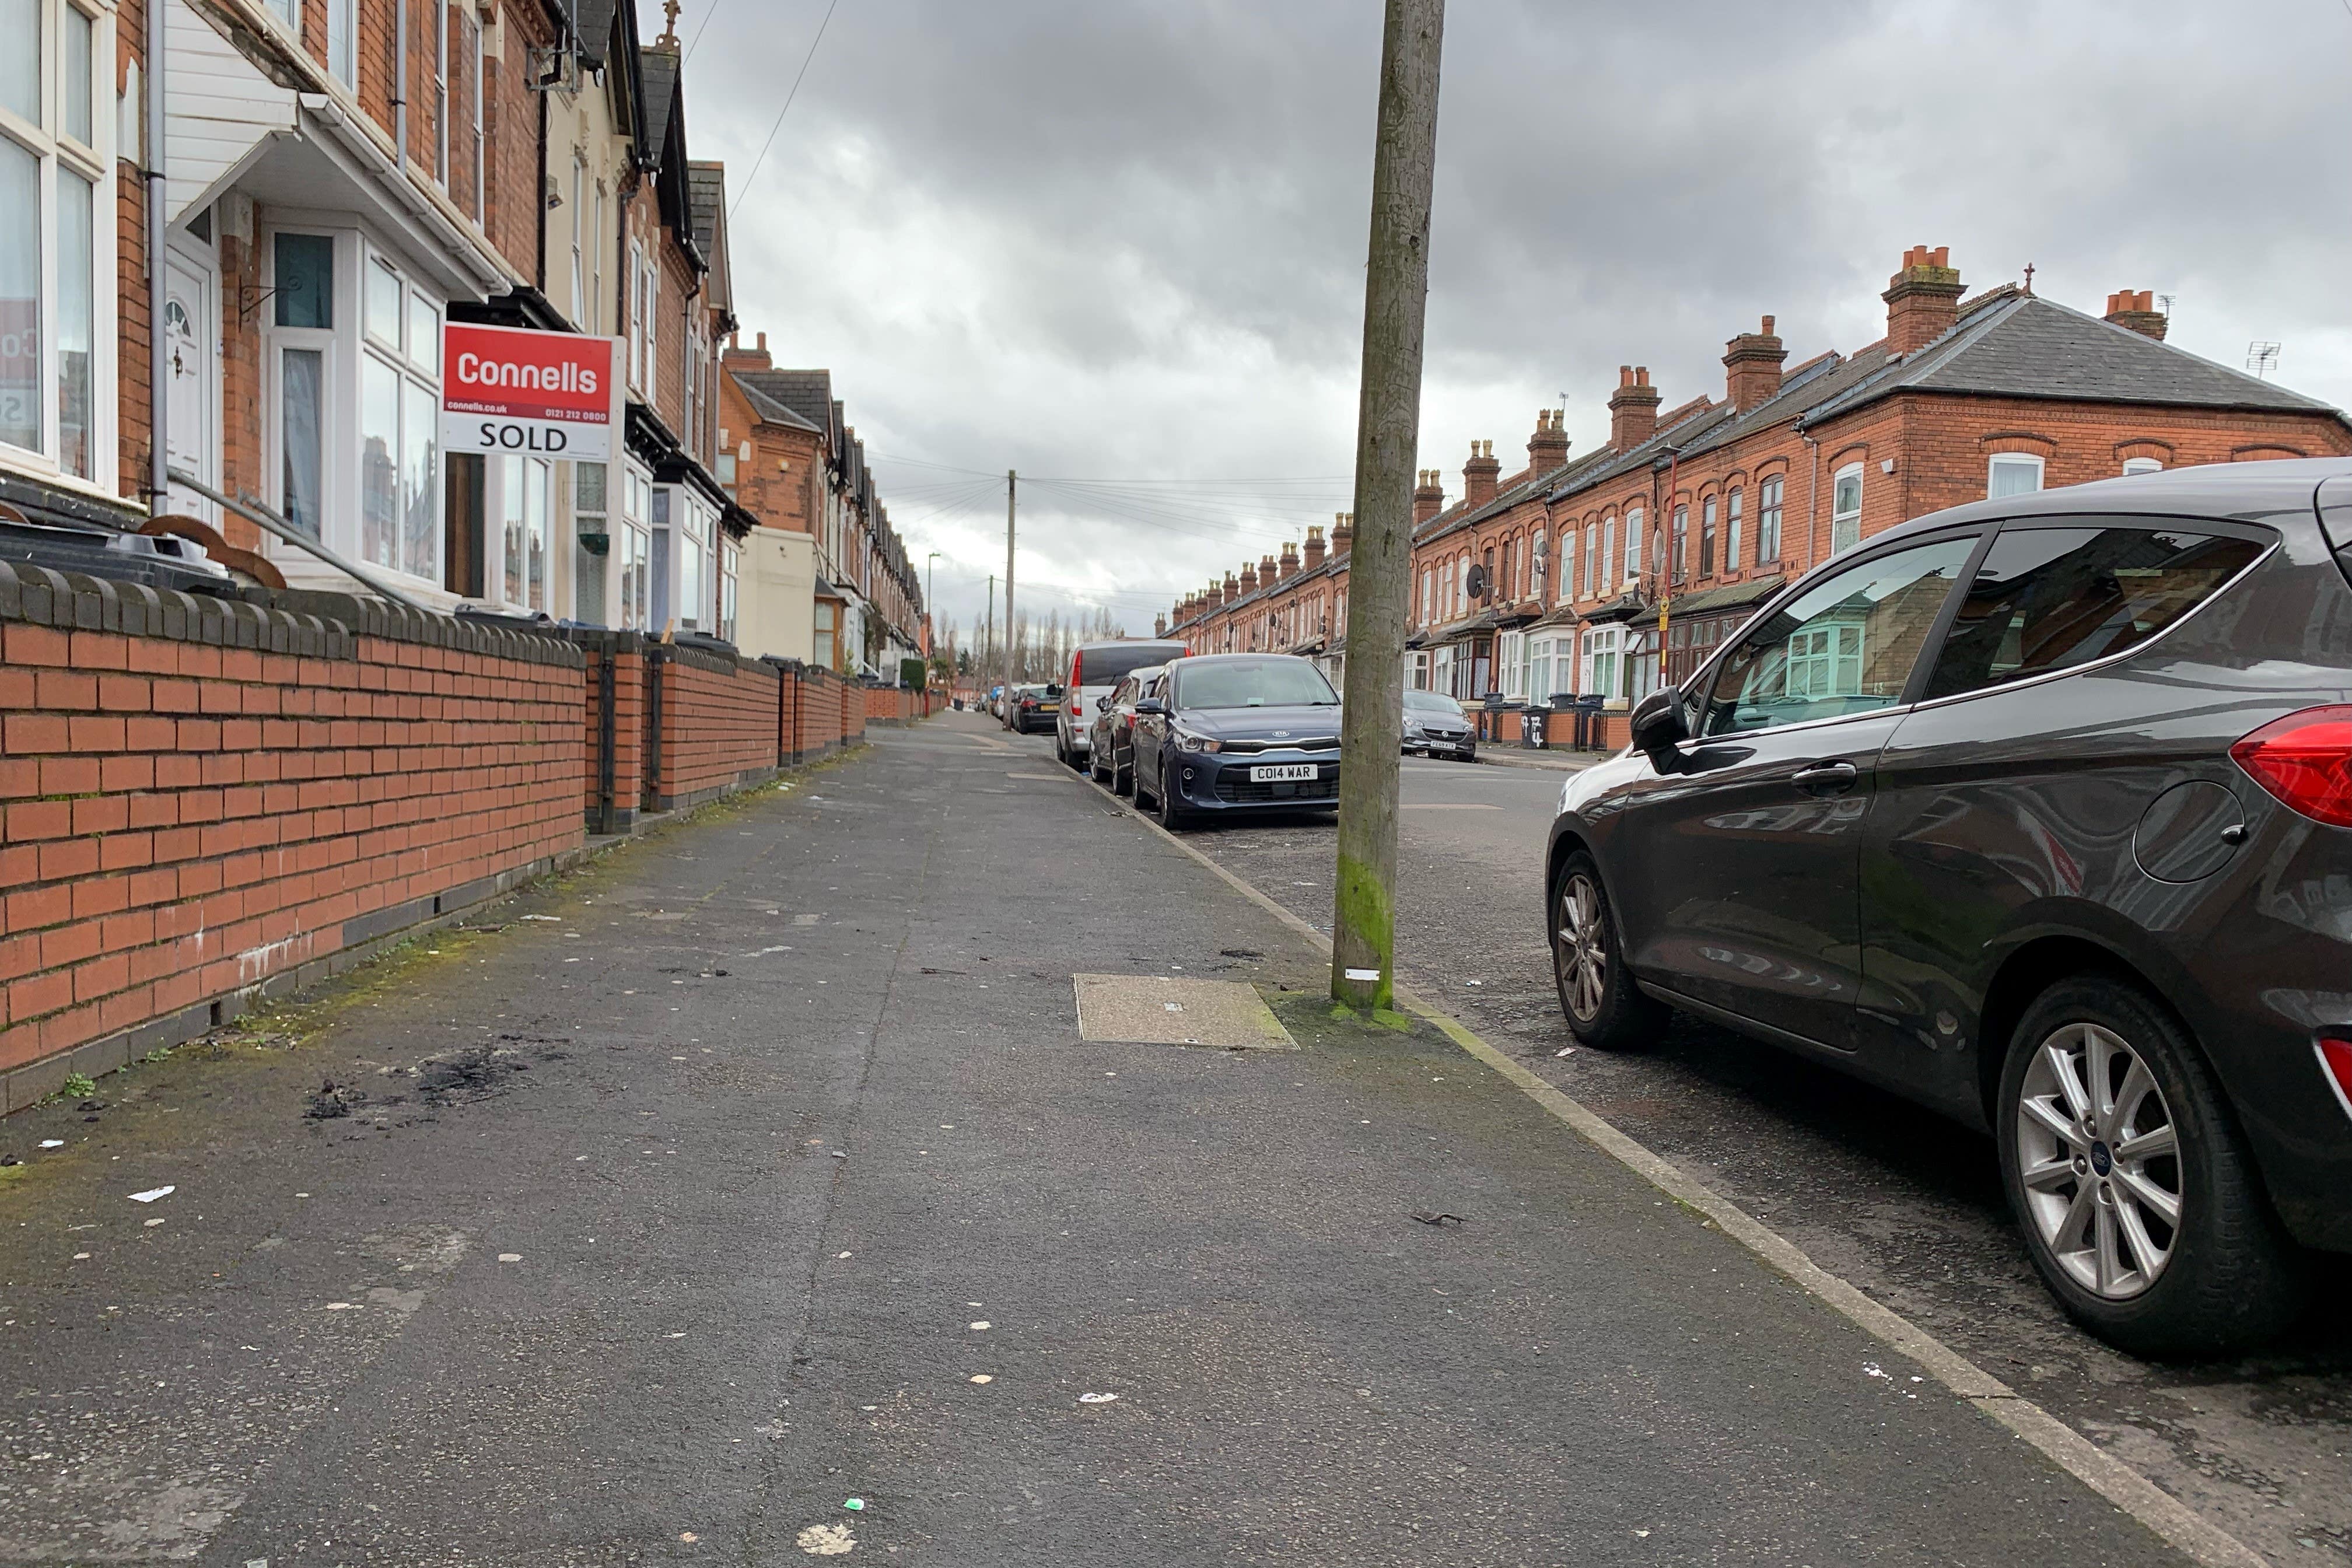 A 28-year-old man has been charged with two counts of attempted murder after two elderly men were set alight in incidents in Birmingham and London (Richard Vernalls/PA)